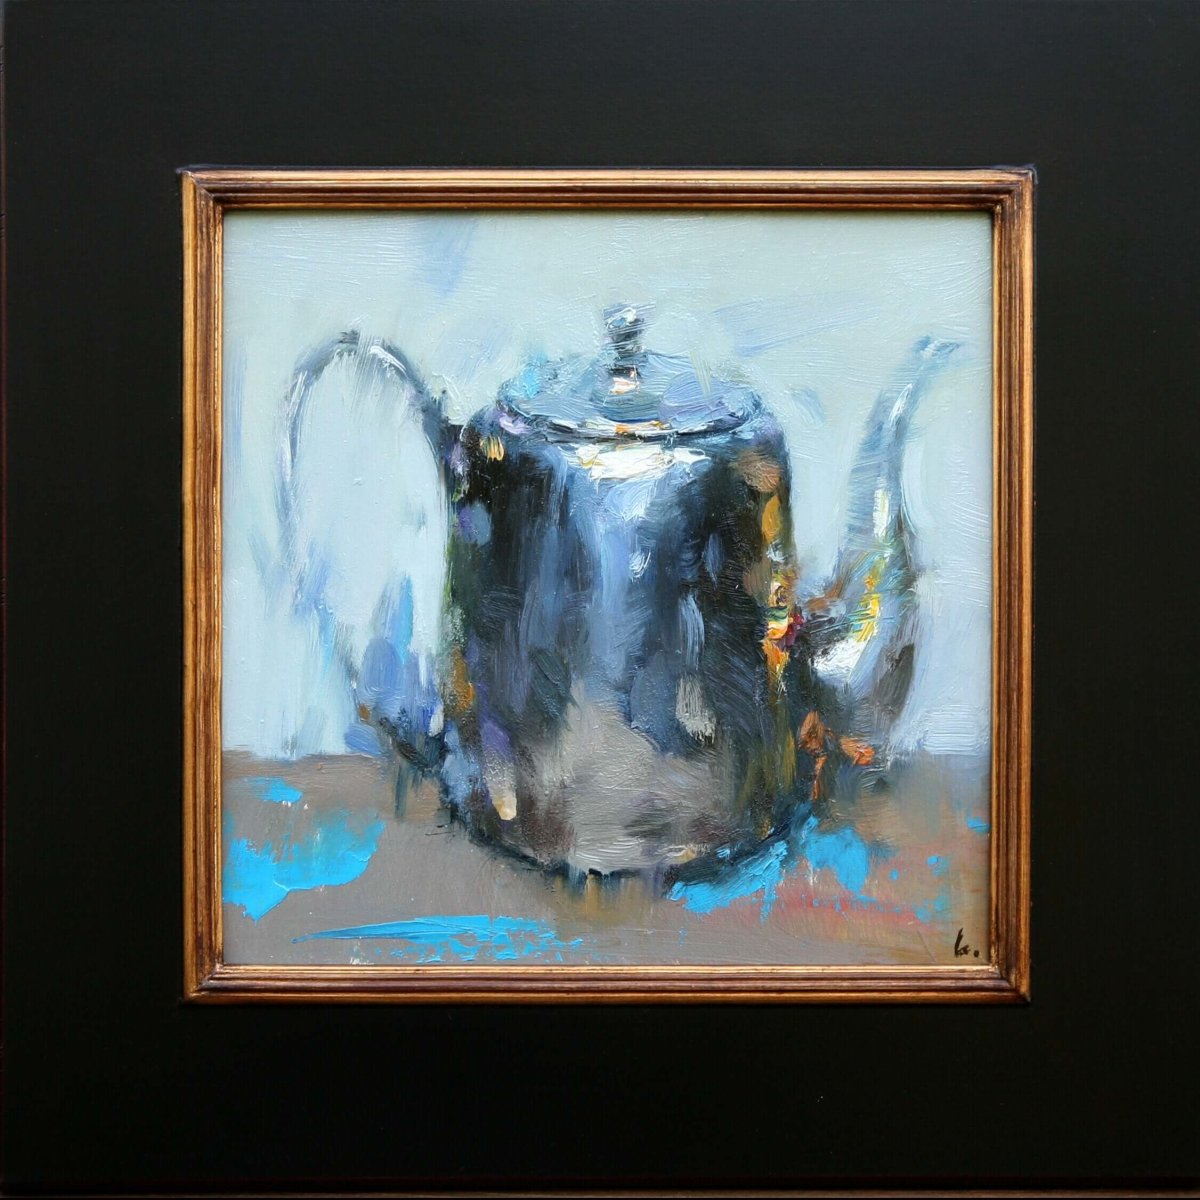 Kettle by Ning Lee at LePrince Galleries